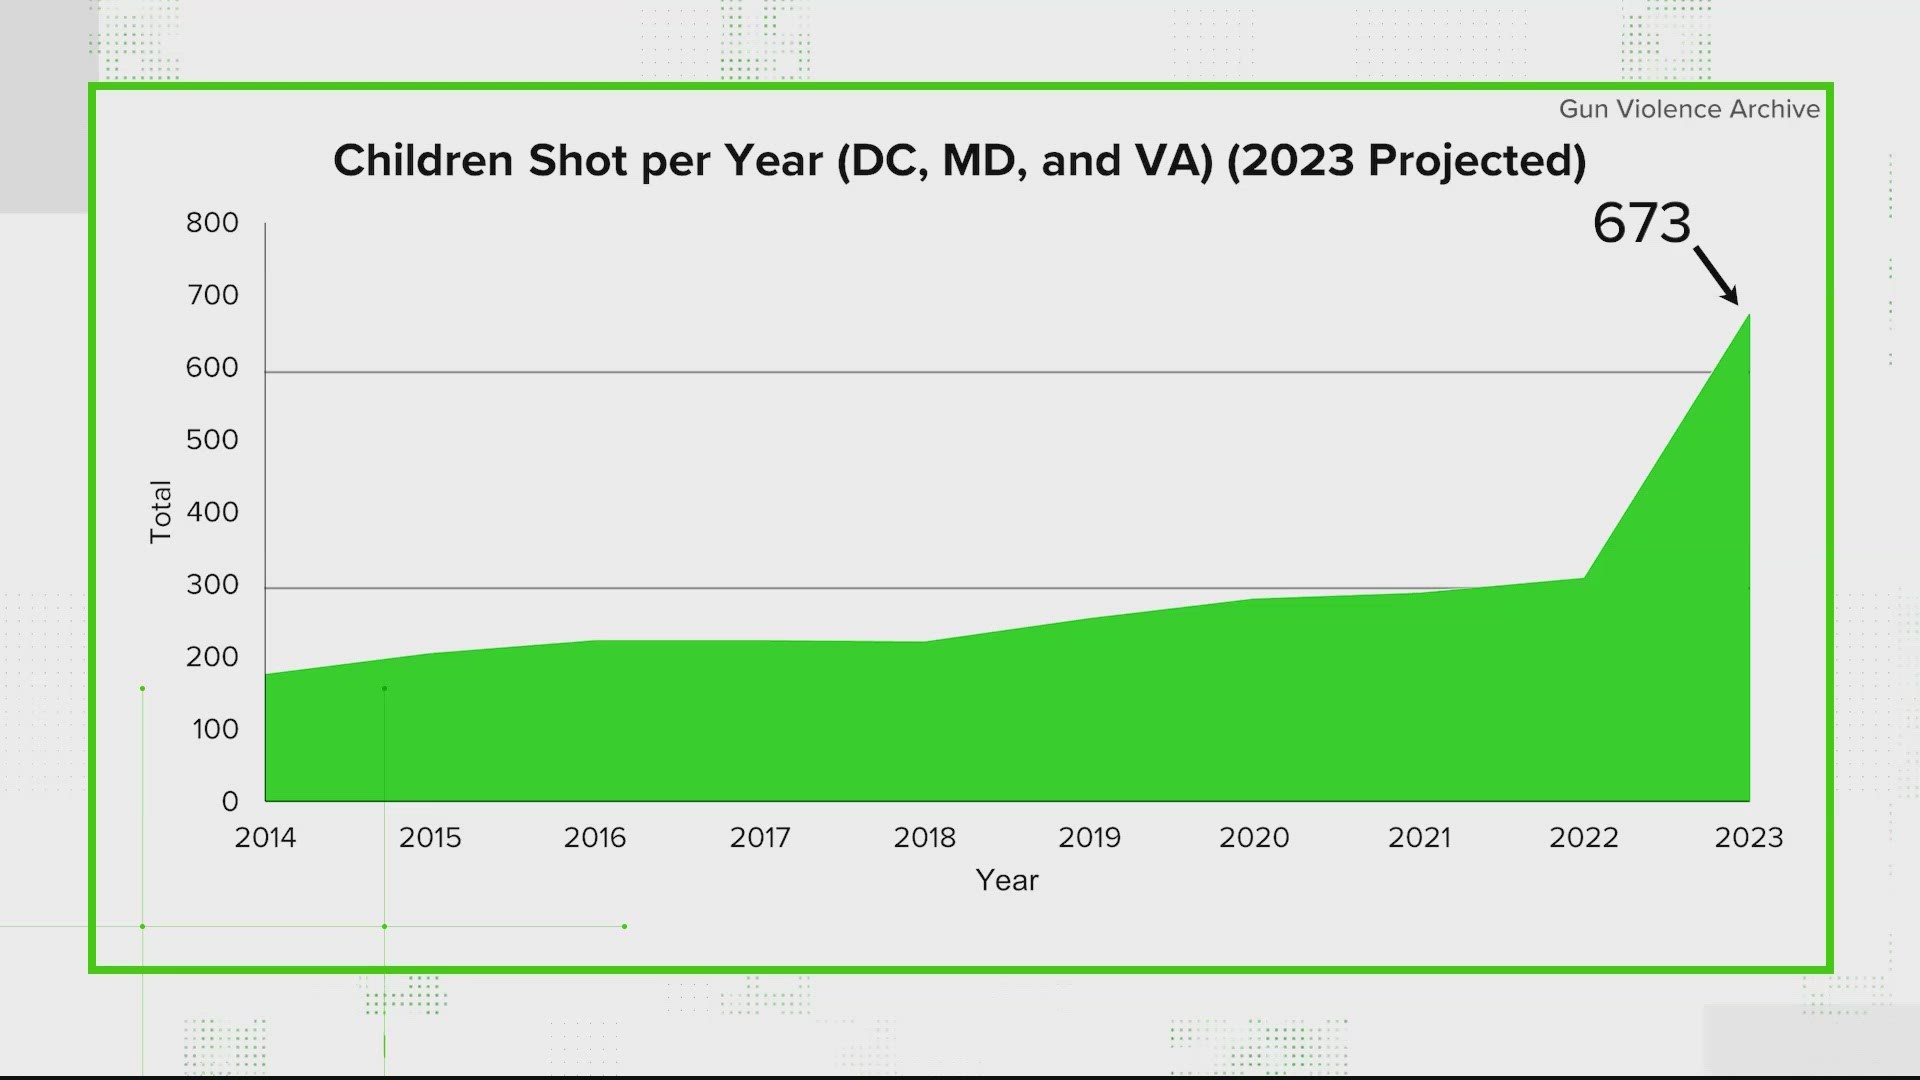 The shootings of two children in Washington D.C. over the weekend put a new focus on a problem that has risen steadily for years and is spiking so far in 2023.